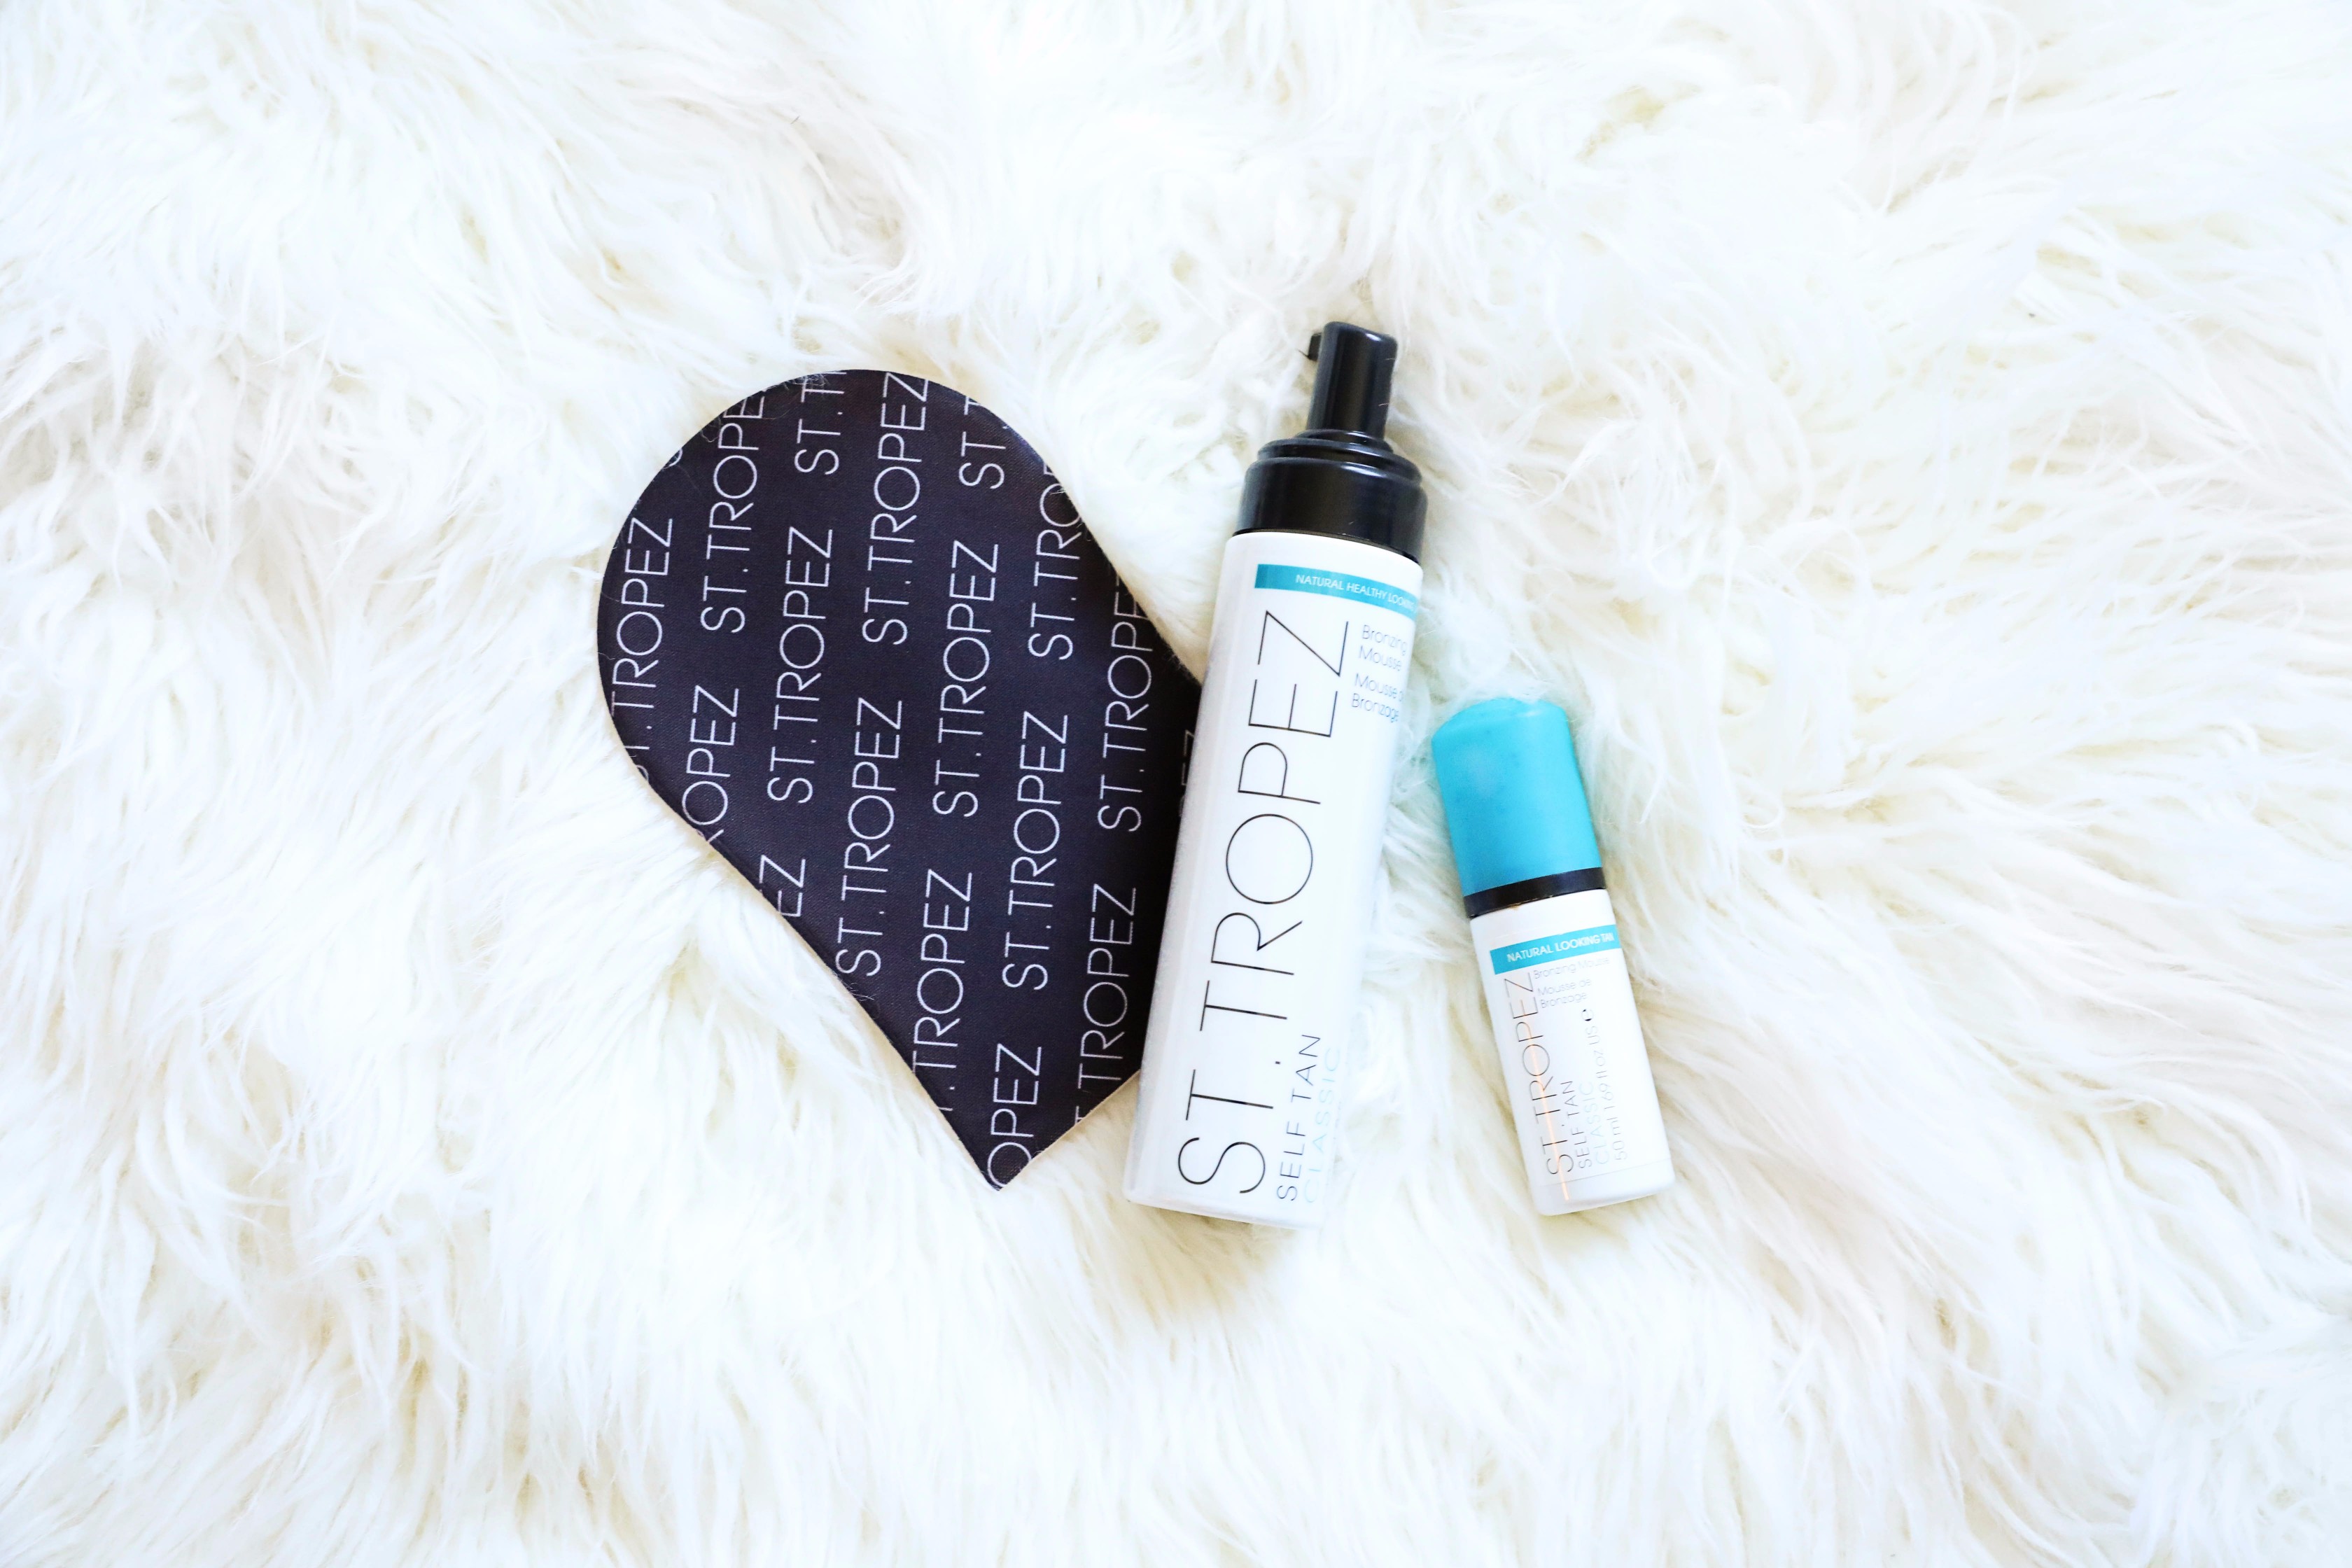 Tanning routine all year long! How I stay tan in the winter using St. Tropez classic tanning foam! Details on beauty blog daily dose of charm by lauren lindmark